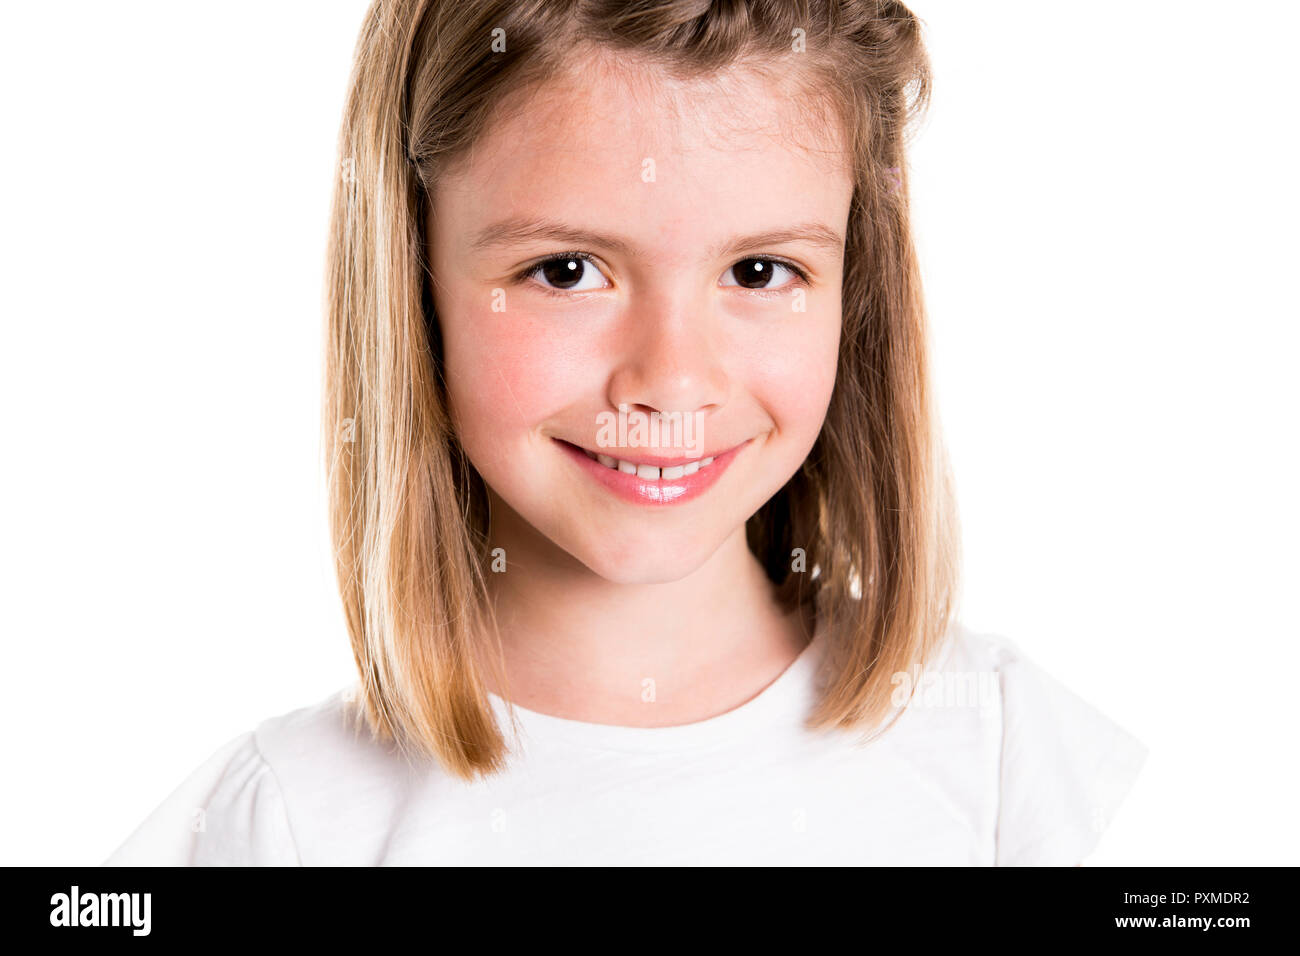 A Portrait of a cute 7 years old girl Isolated over white background Stock Photo